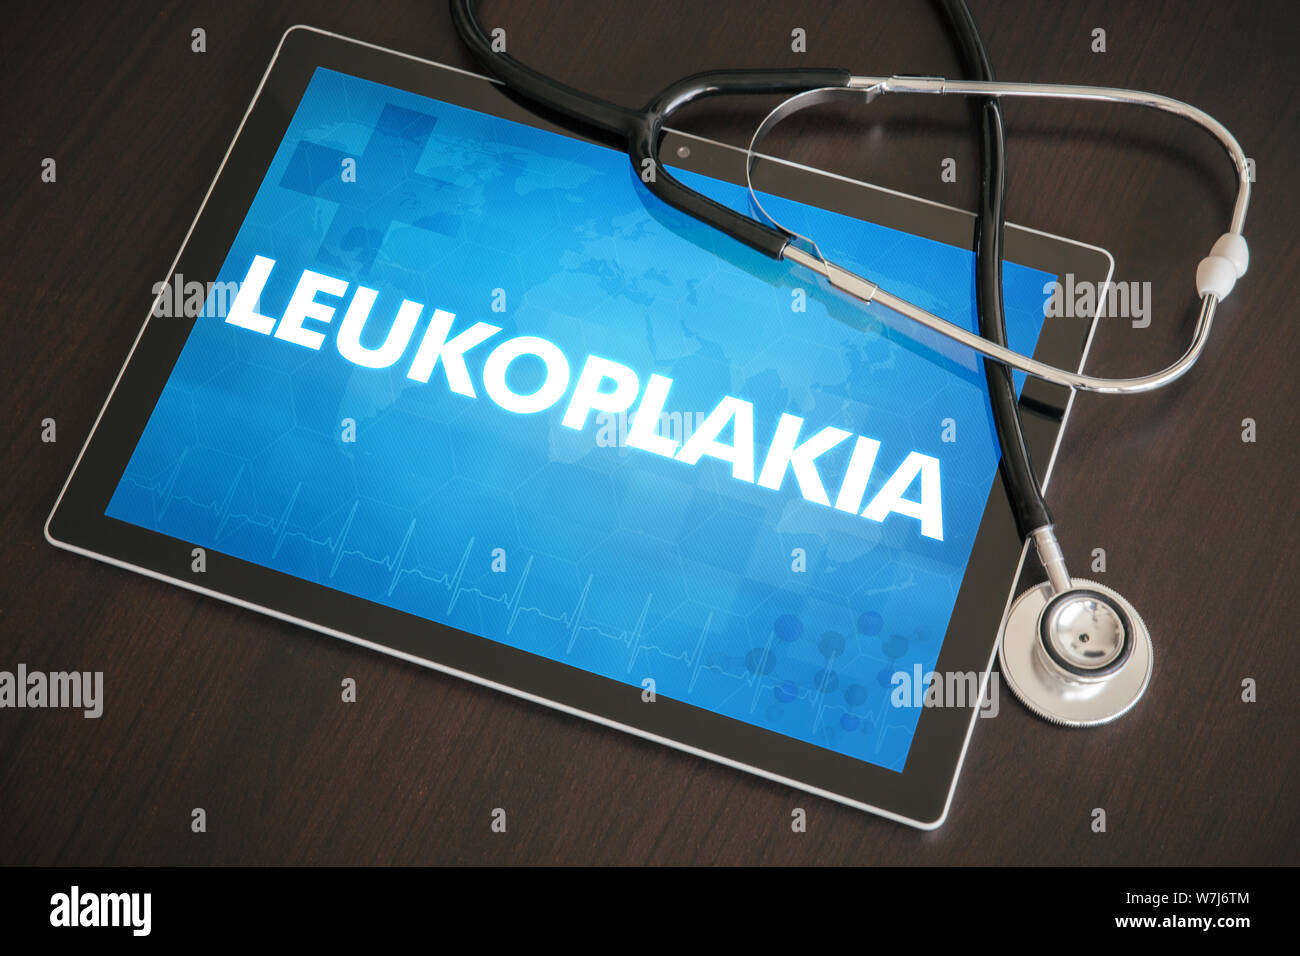 Leukoplakia (cutaneous disease) diagnosis medical concept on tablet screen with stethoscope. Stock Photo